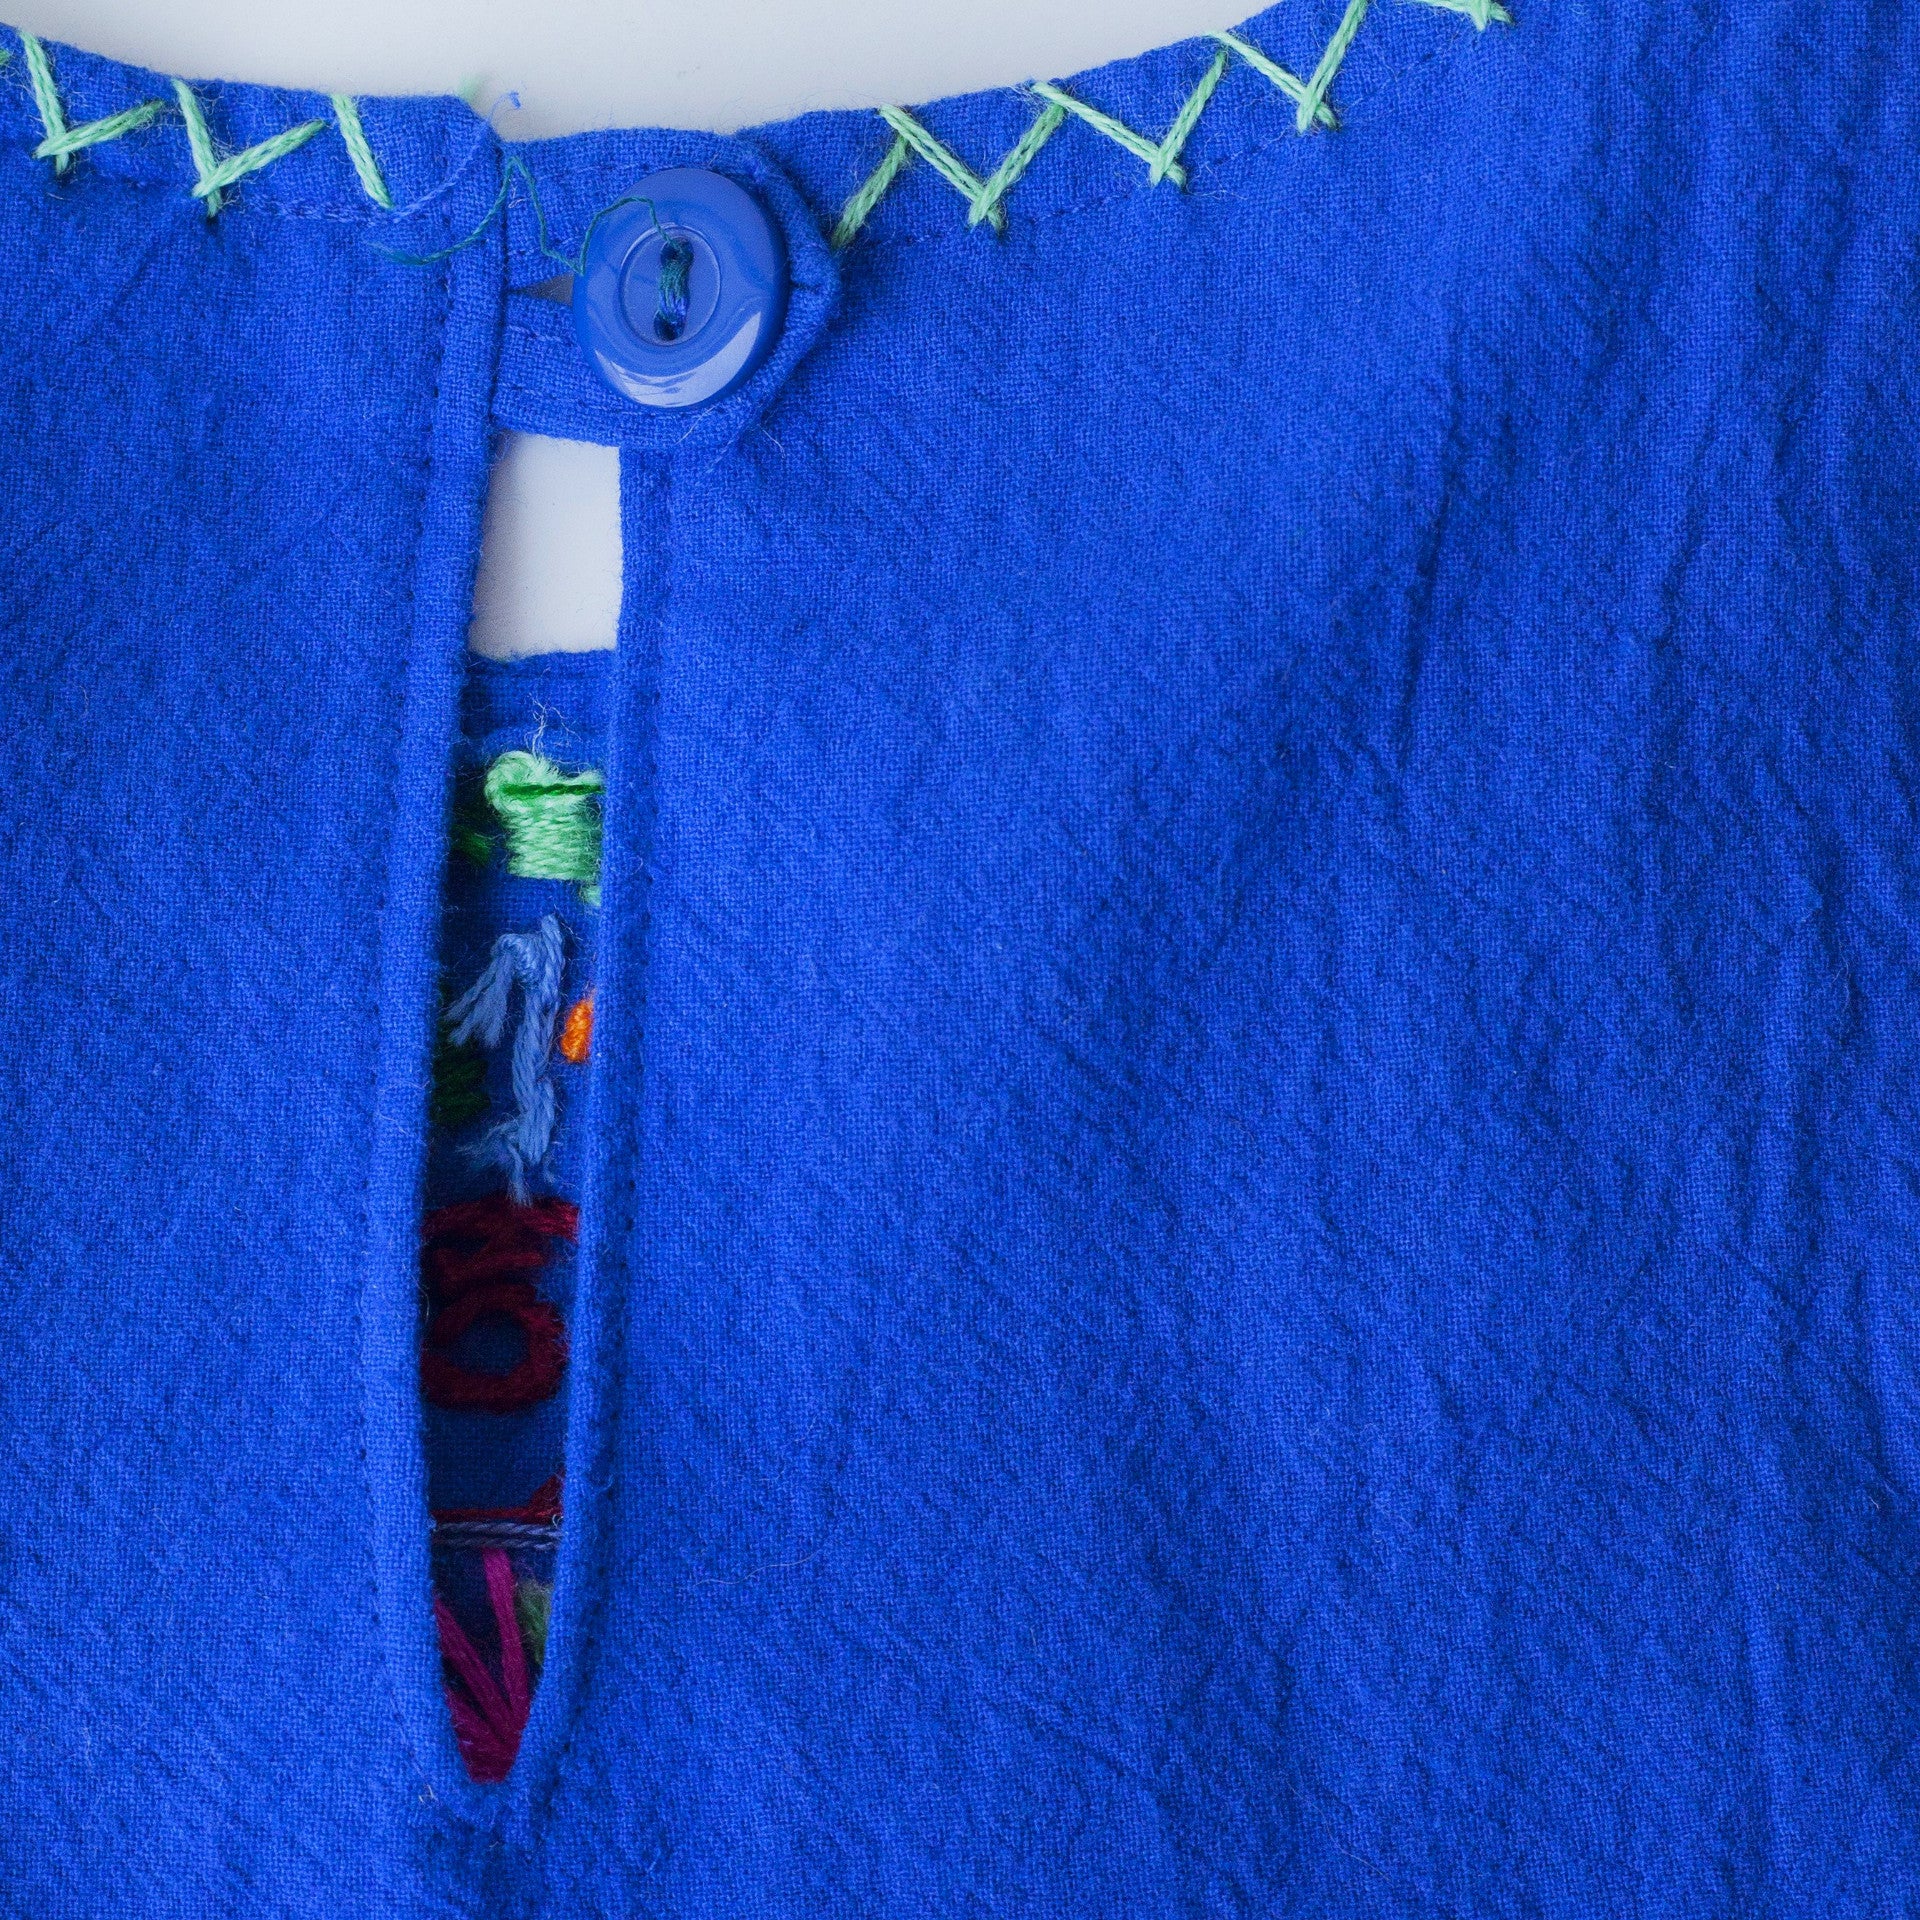 Detail of reverse-side button closure at neckline with cross-stitch trim.